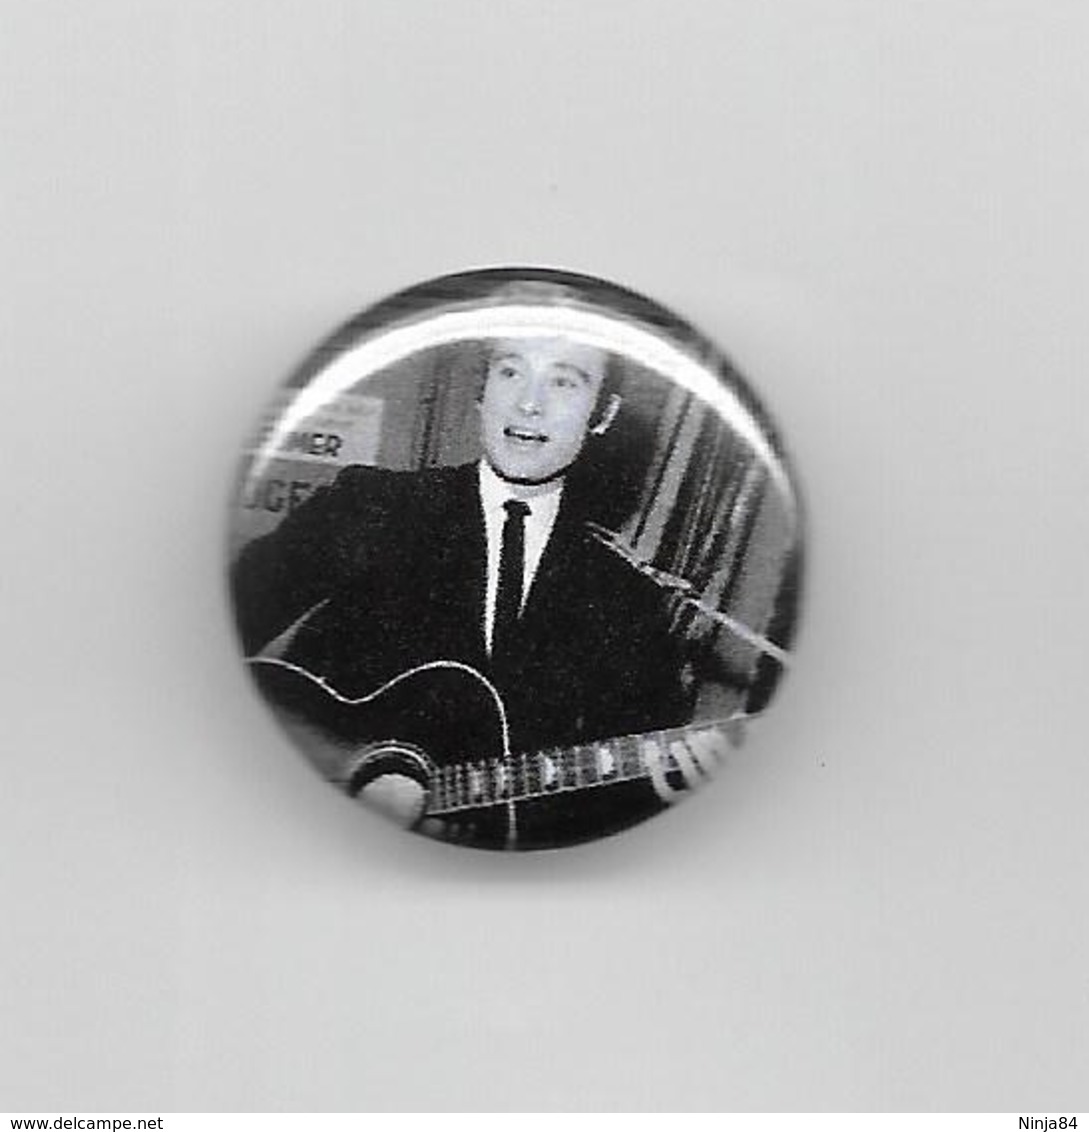 DIVERS  Johnny Hallyday  "  Badge  " - Other Products